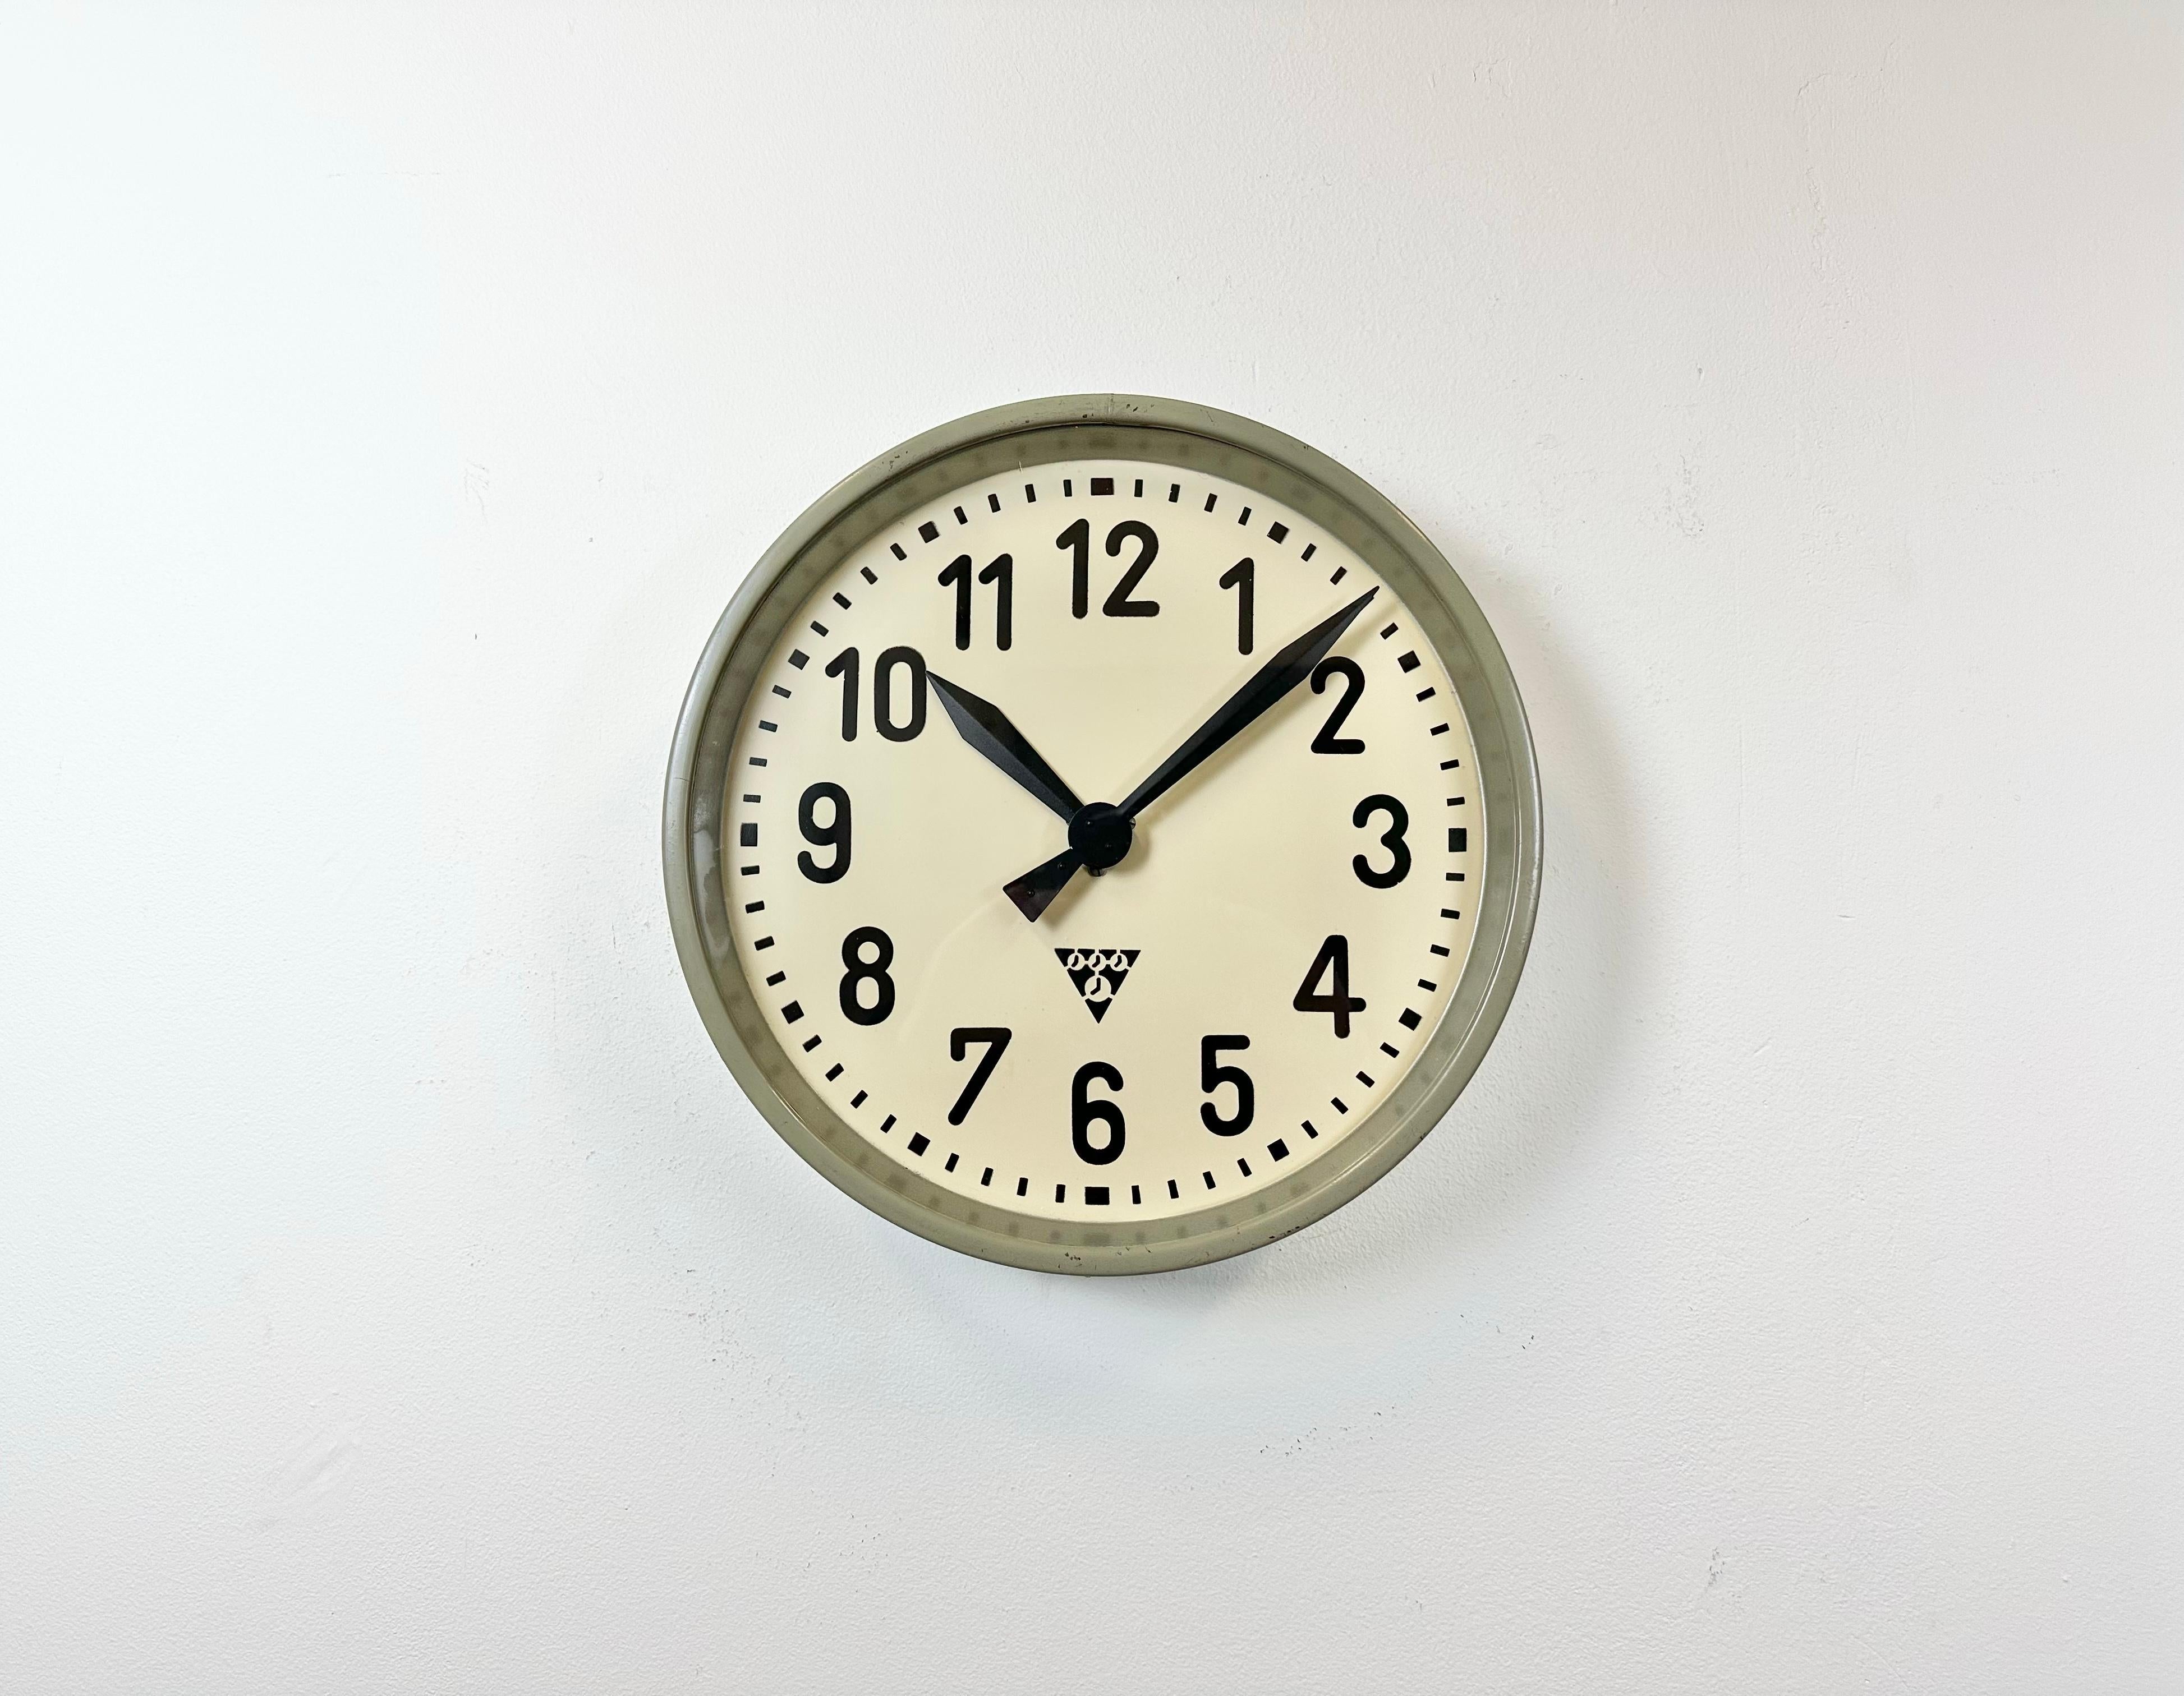 This wall clock was produced by Pragotron in former Czechoslovakia during the 1950s. It features a grey metal frame, iron dial, aluminium hands and a clear glass cover. The piece has been converted into a battery-powered clockwork and requires only